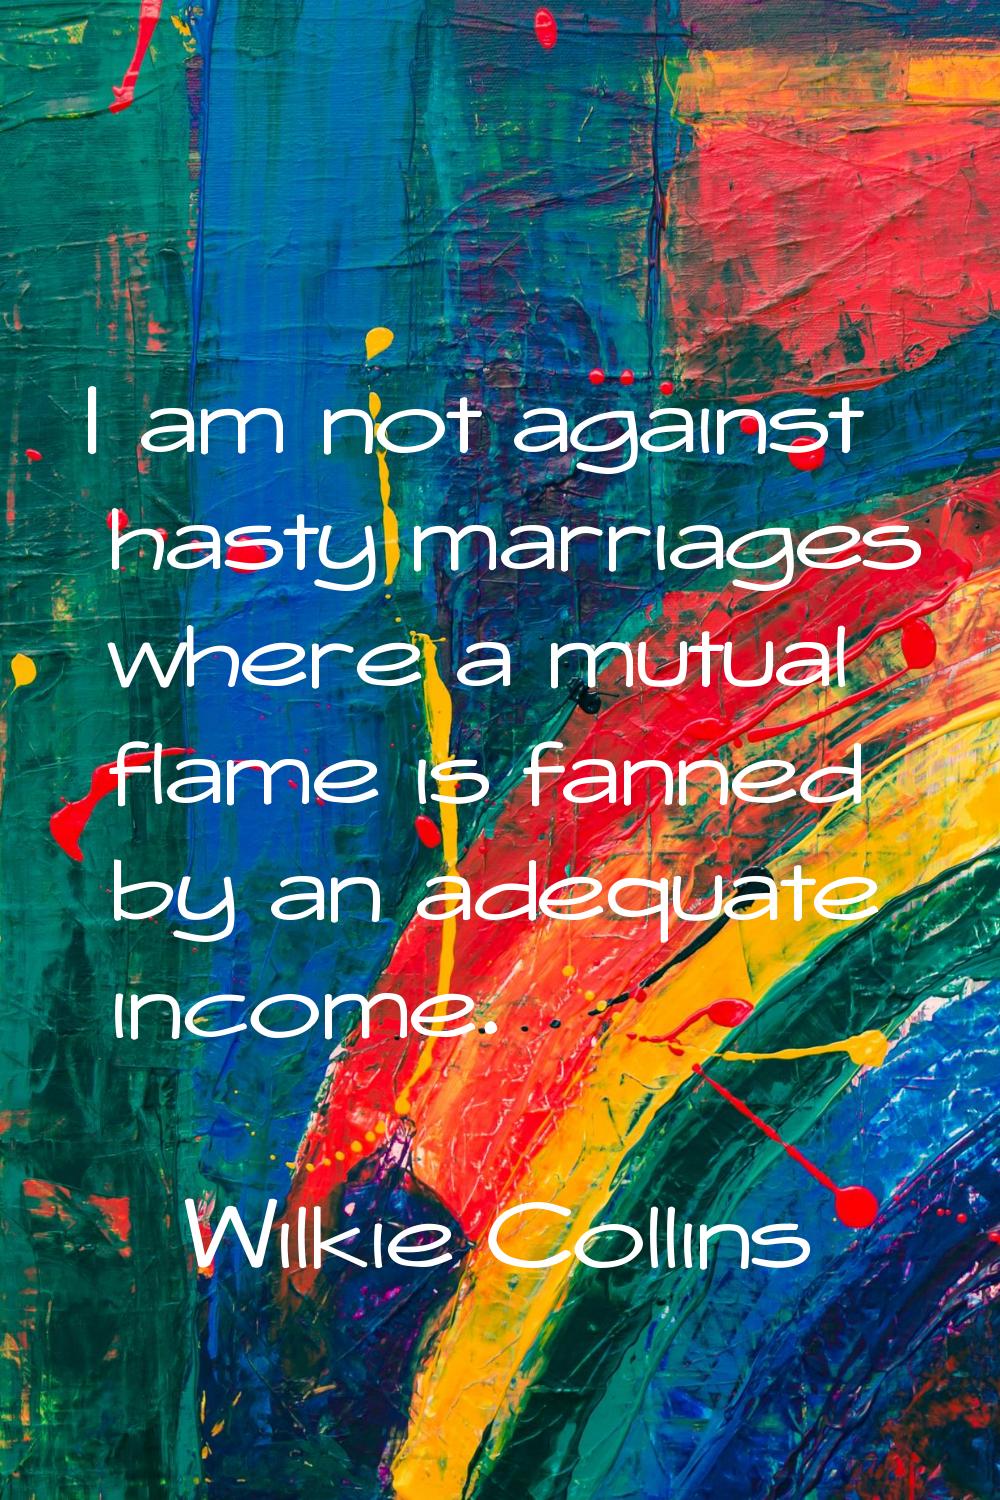 I am not against hasty marriages where a mutual flame is fanned by an adequate income.